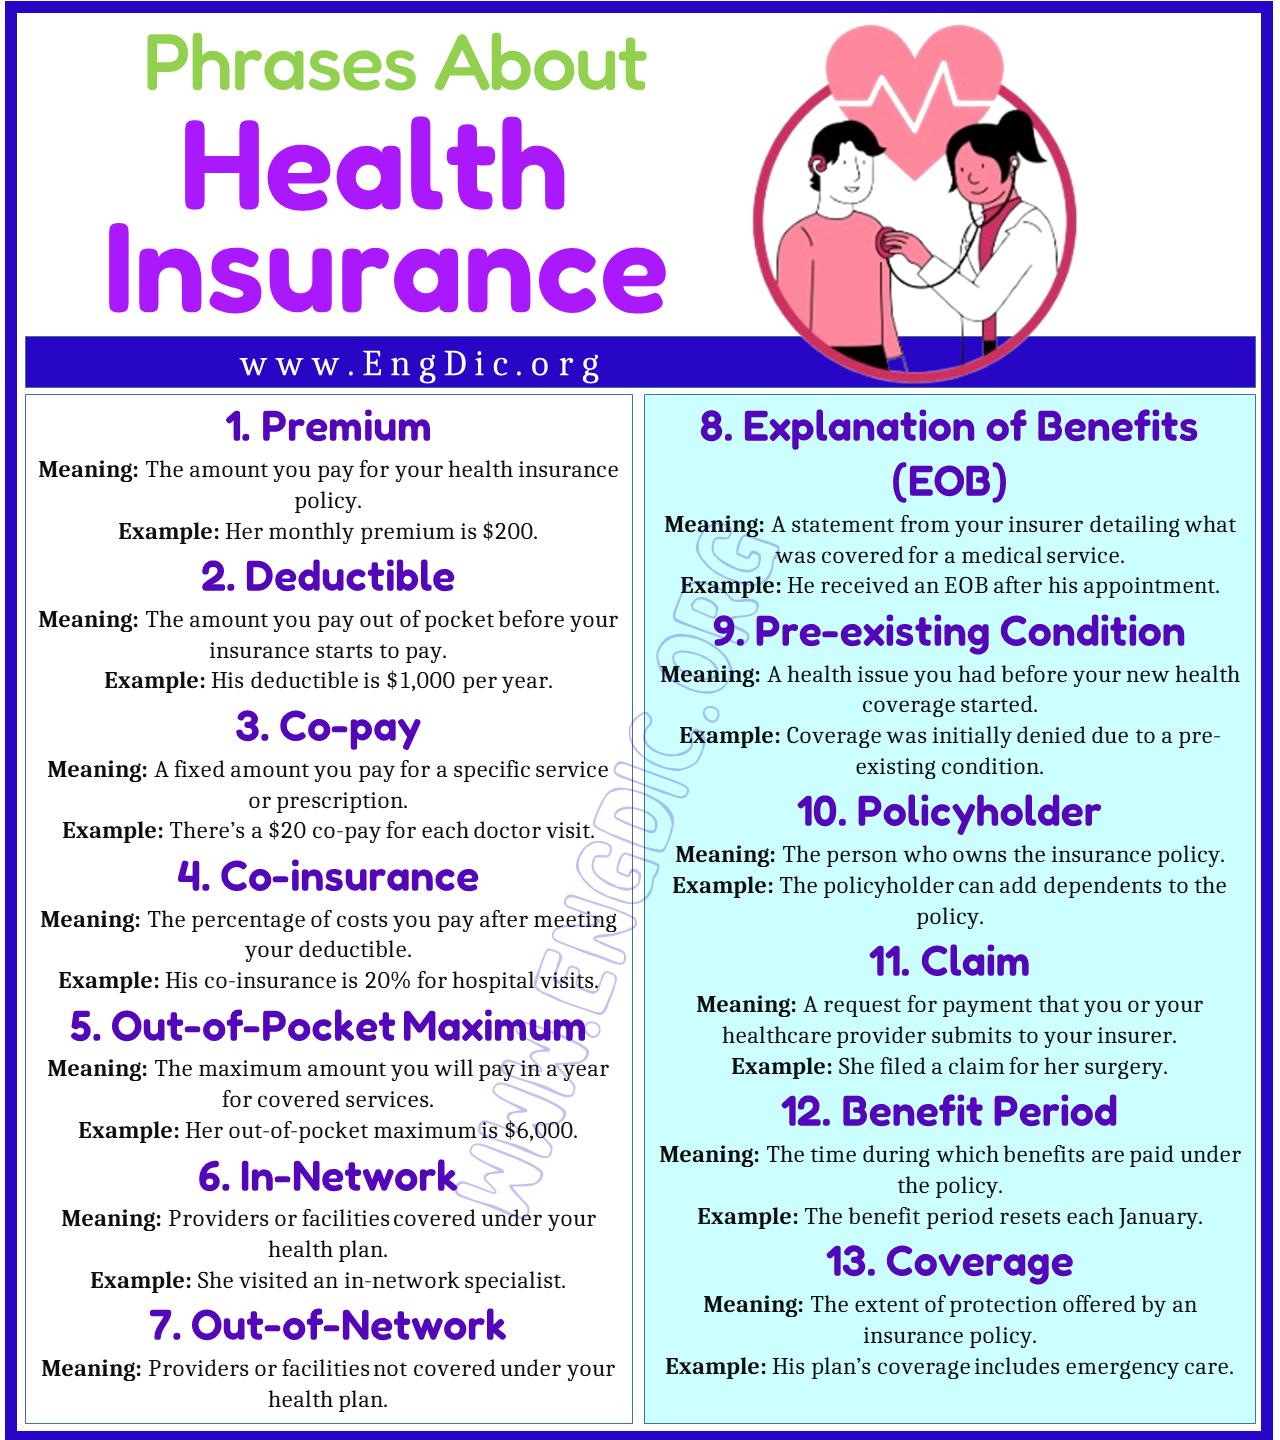 Phrases About Health Insurance